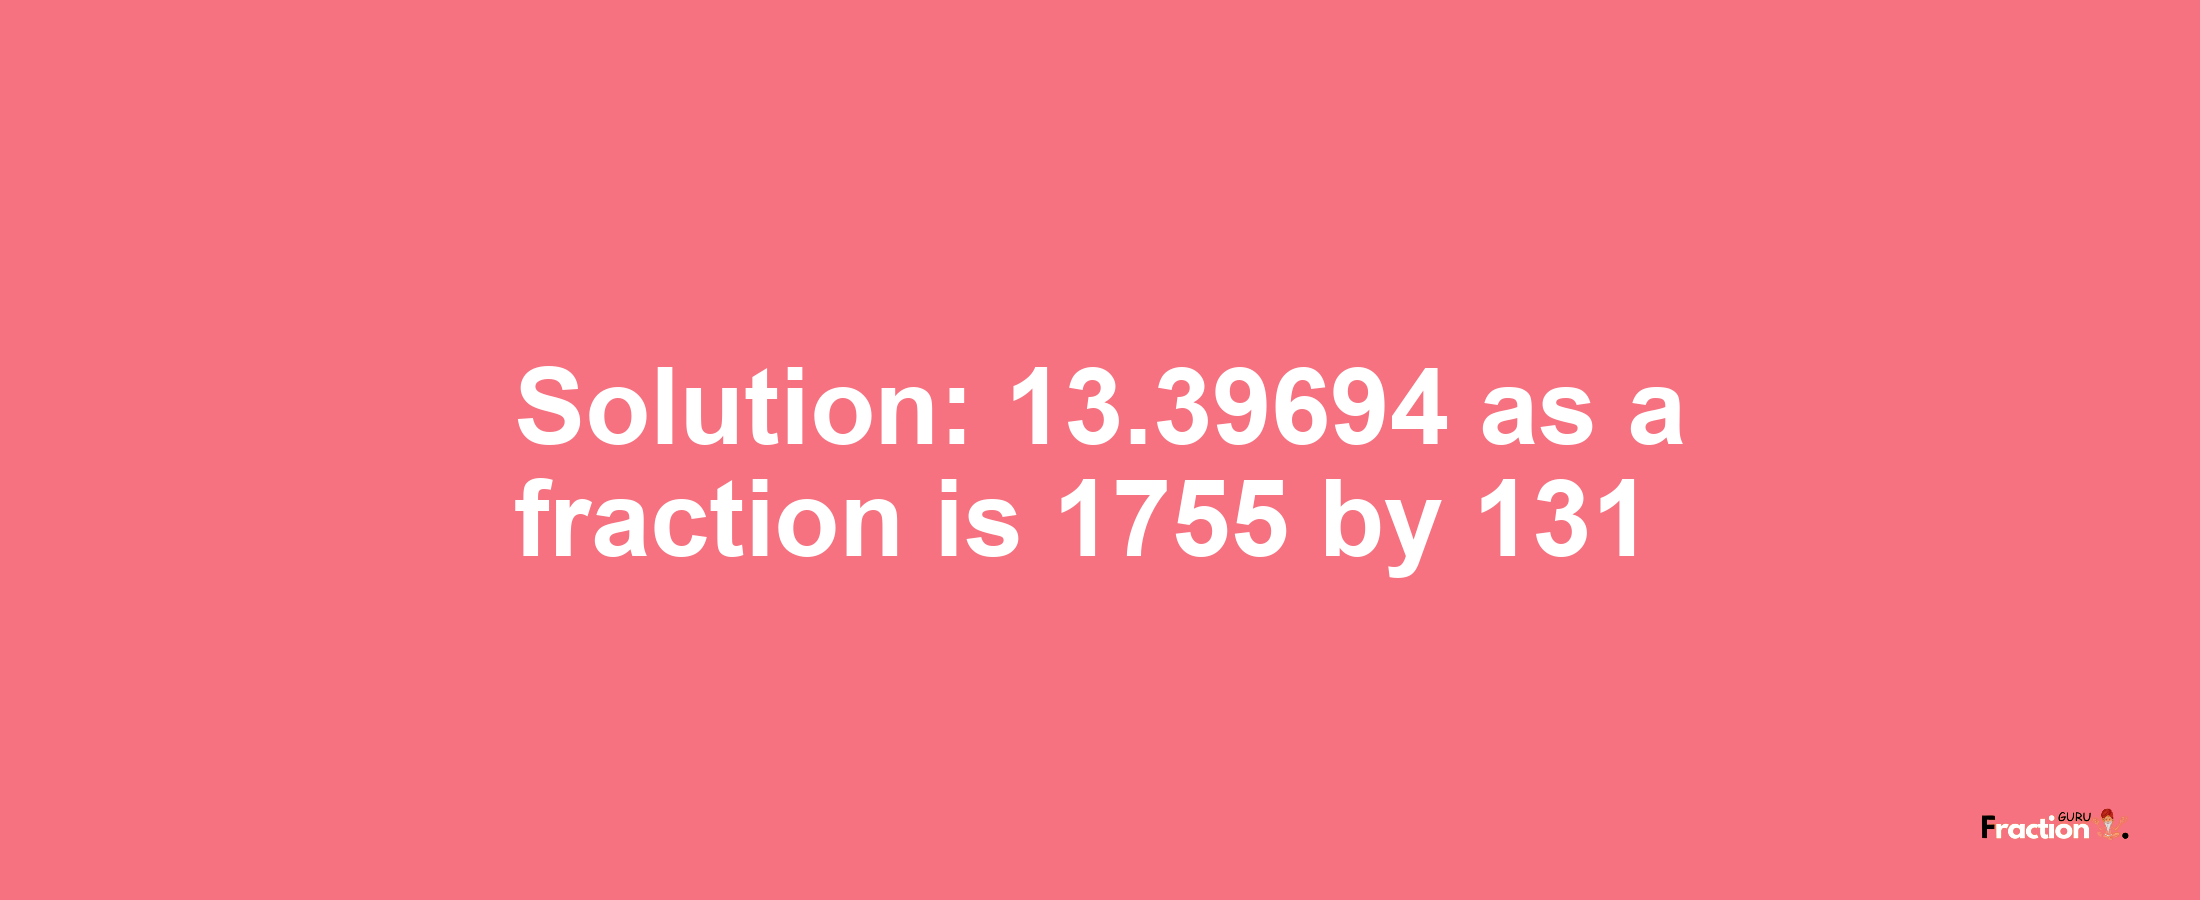 Solution:13.39694 as a fraction is 1755/131